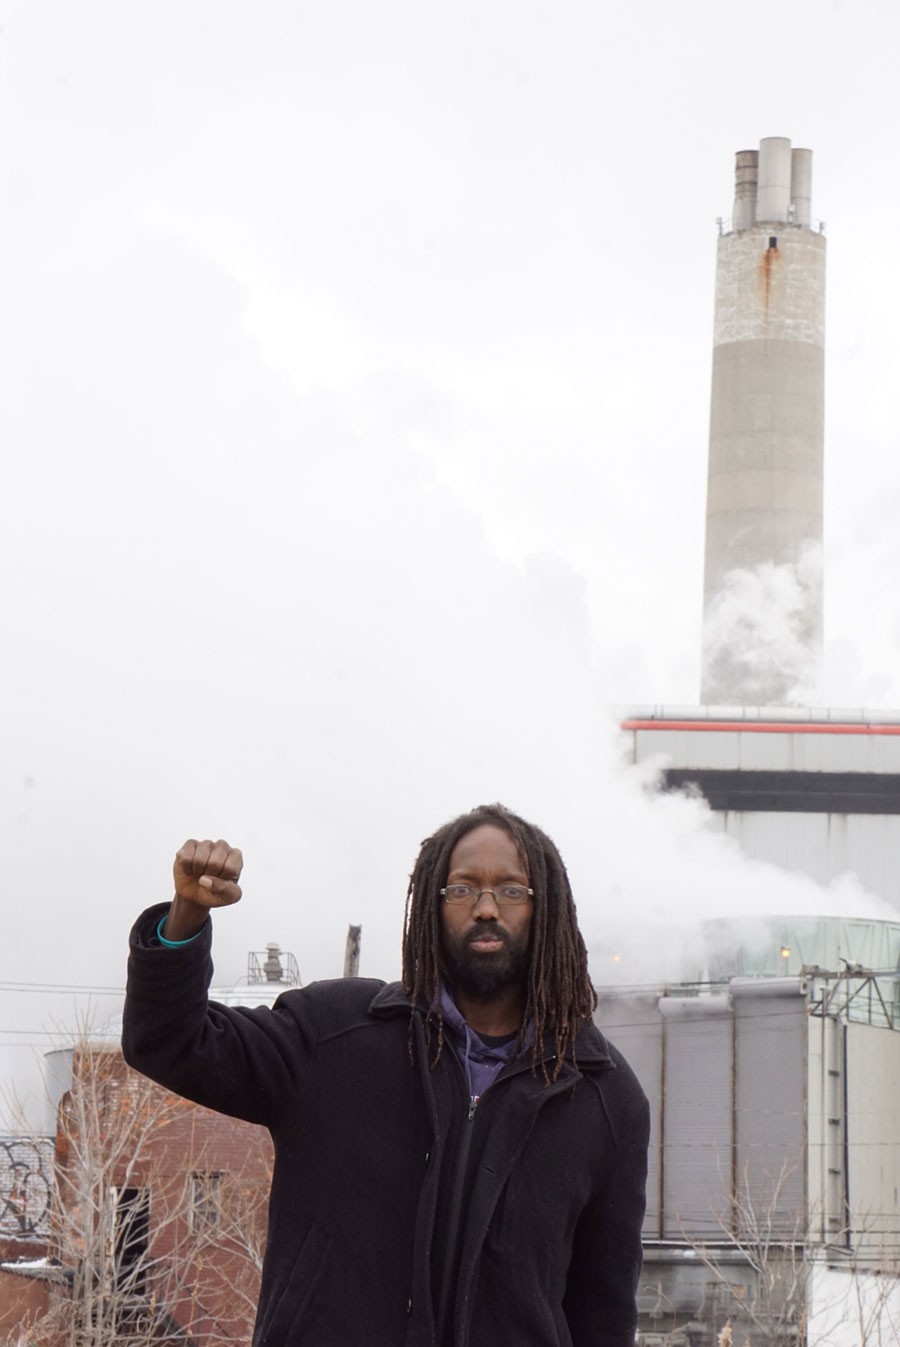 William Copeland is the climate justice director for the East Michigan Environmental Action Council, and is active with the Breathe Free Detroit campaign. - Jay Jurma